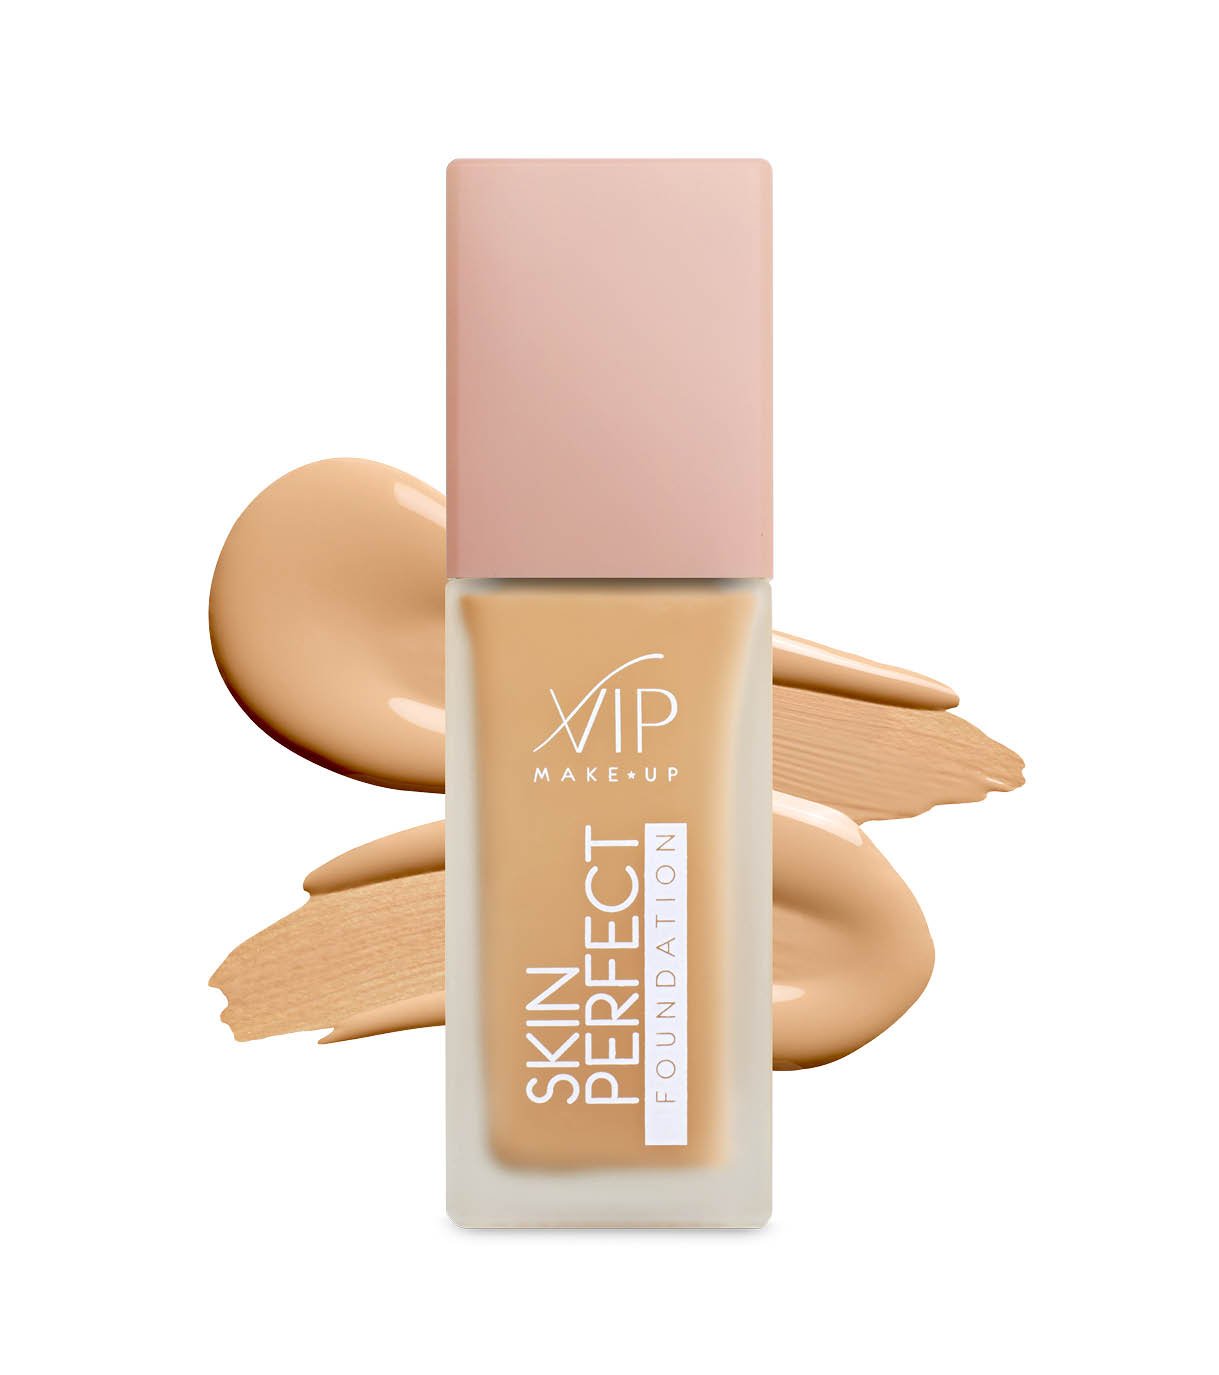 VIP MAKE-UP SKIN PERFECT FOUNDATION ANTIAGE 30ml